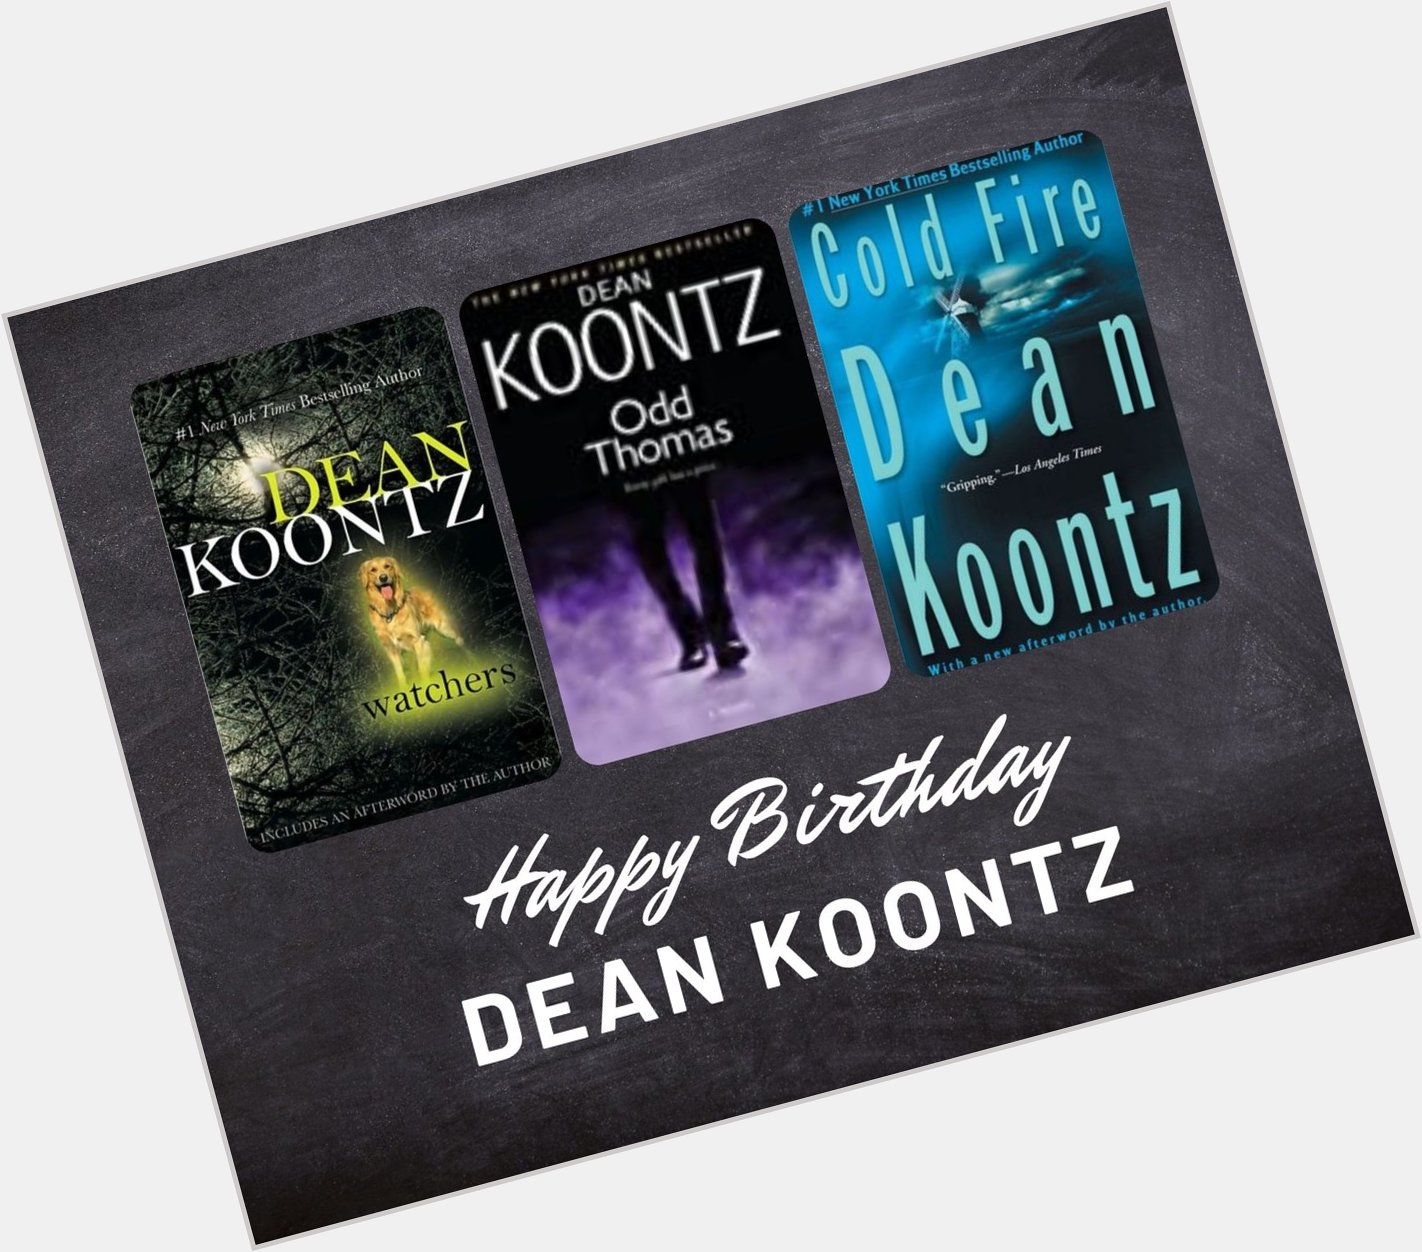 HAPPY BIRTHDAY! What are some of your favorite books by Dean Koontz?   